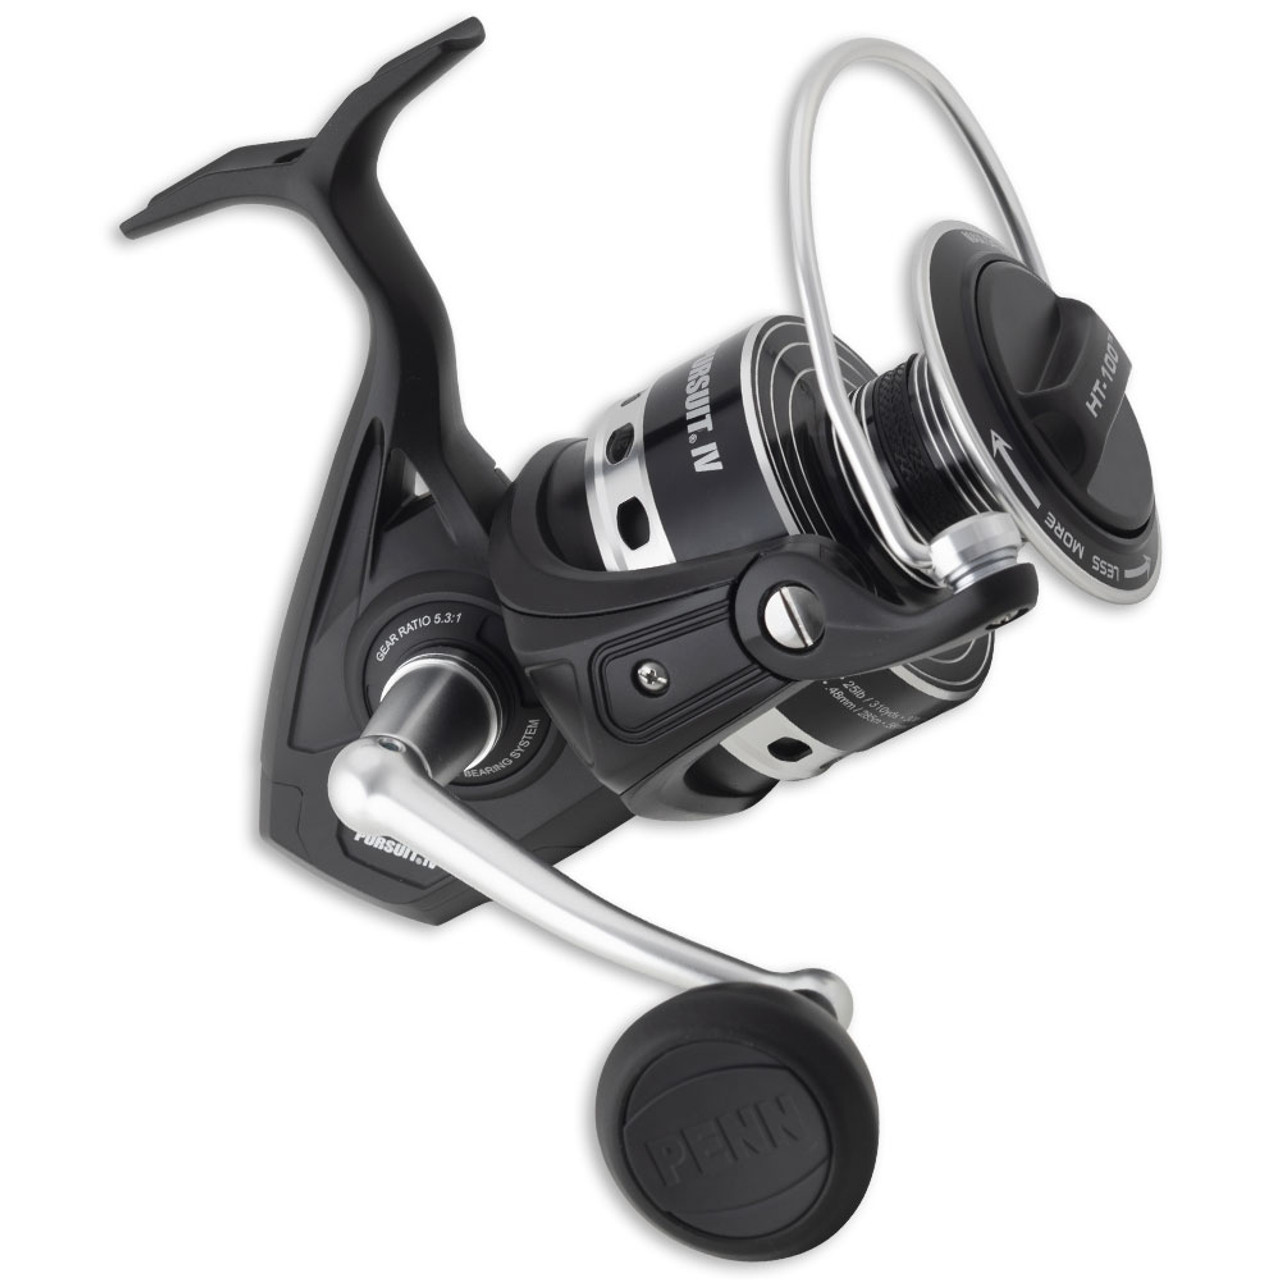 Penn Pursuit Fishing Rod and Reel Combo